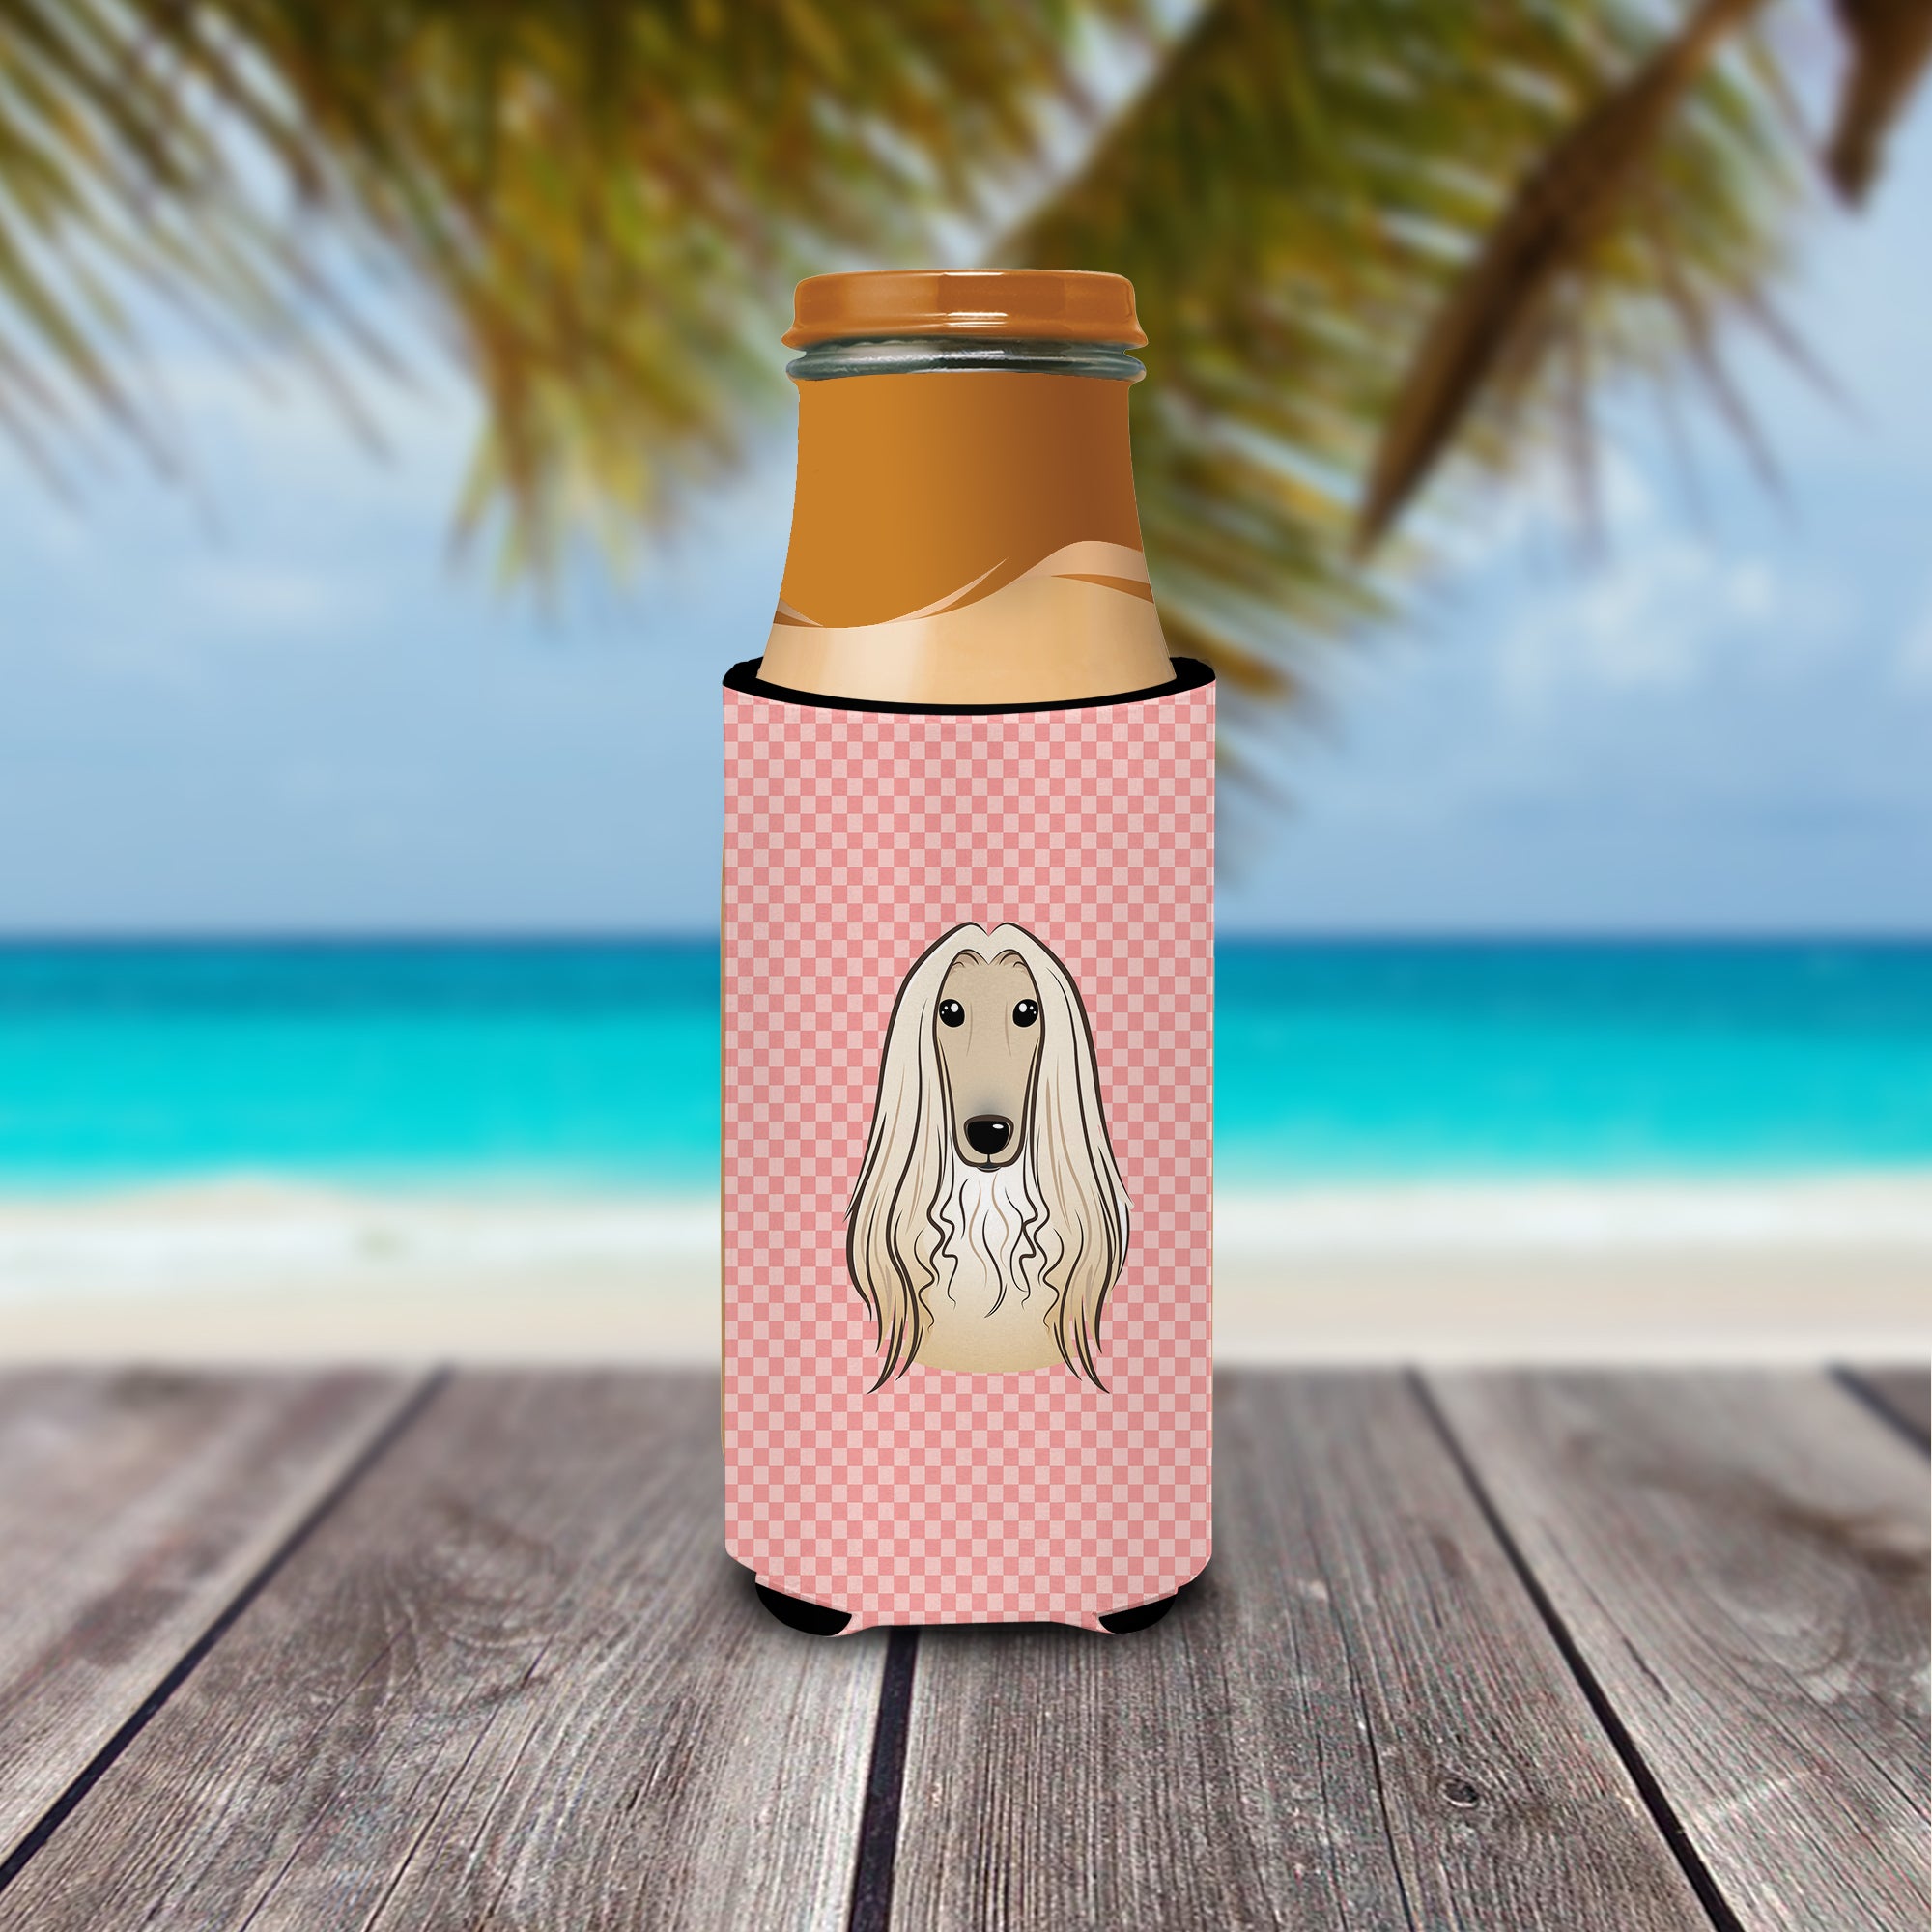 Checkerboard Pink Afghan Hound Ultra Beverage Insulators for slim cans BB1244MUK